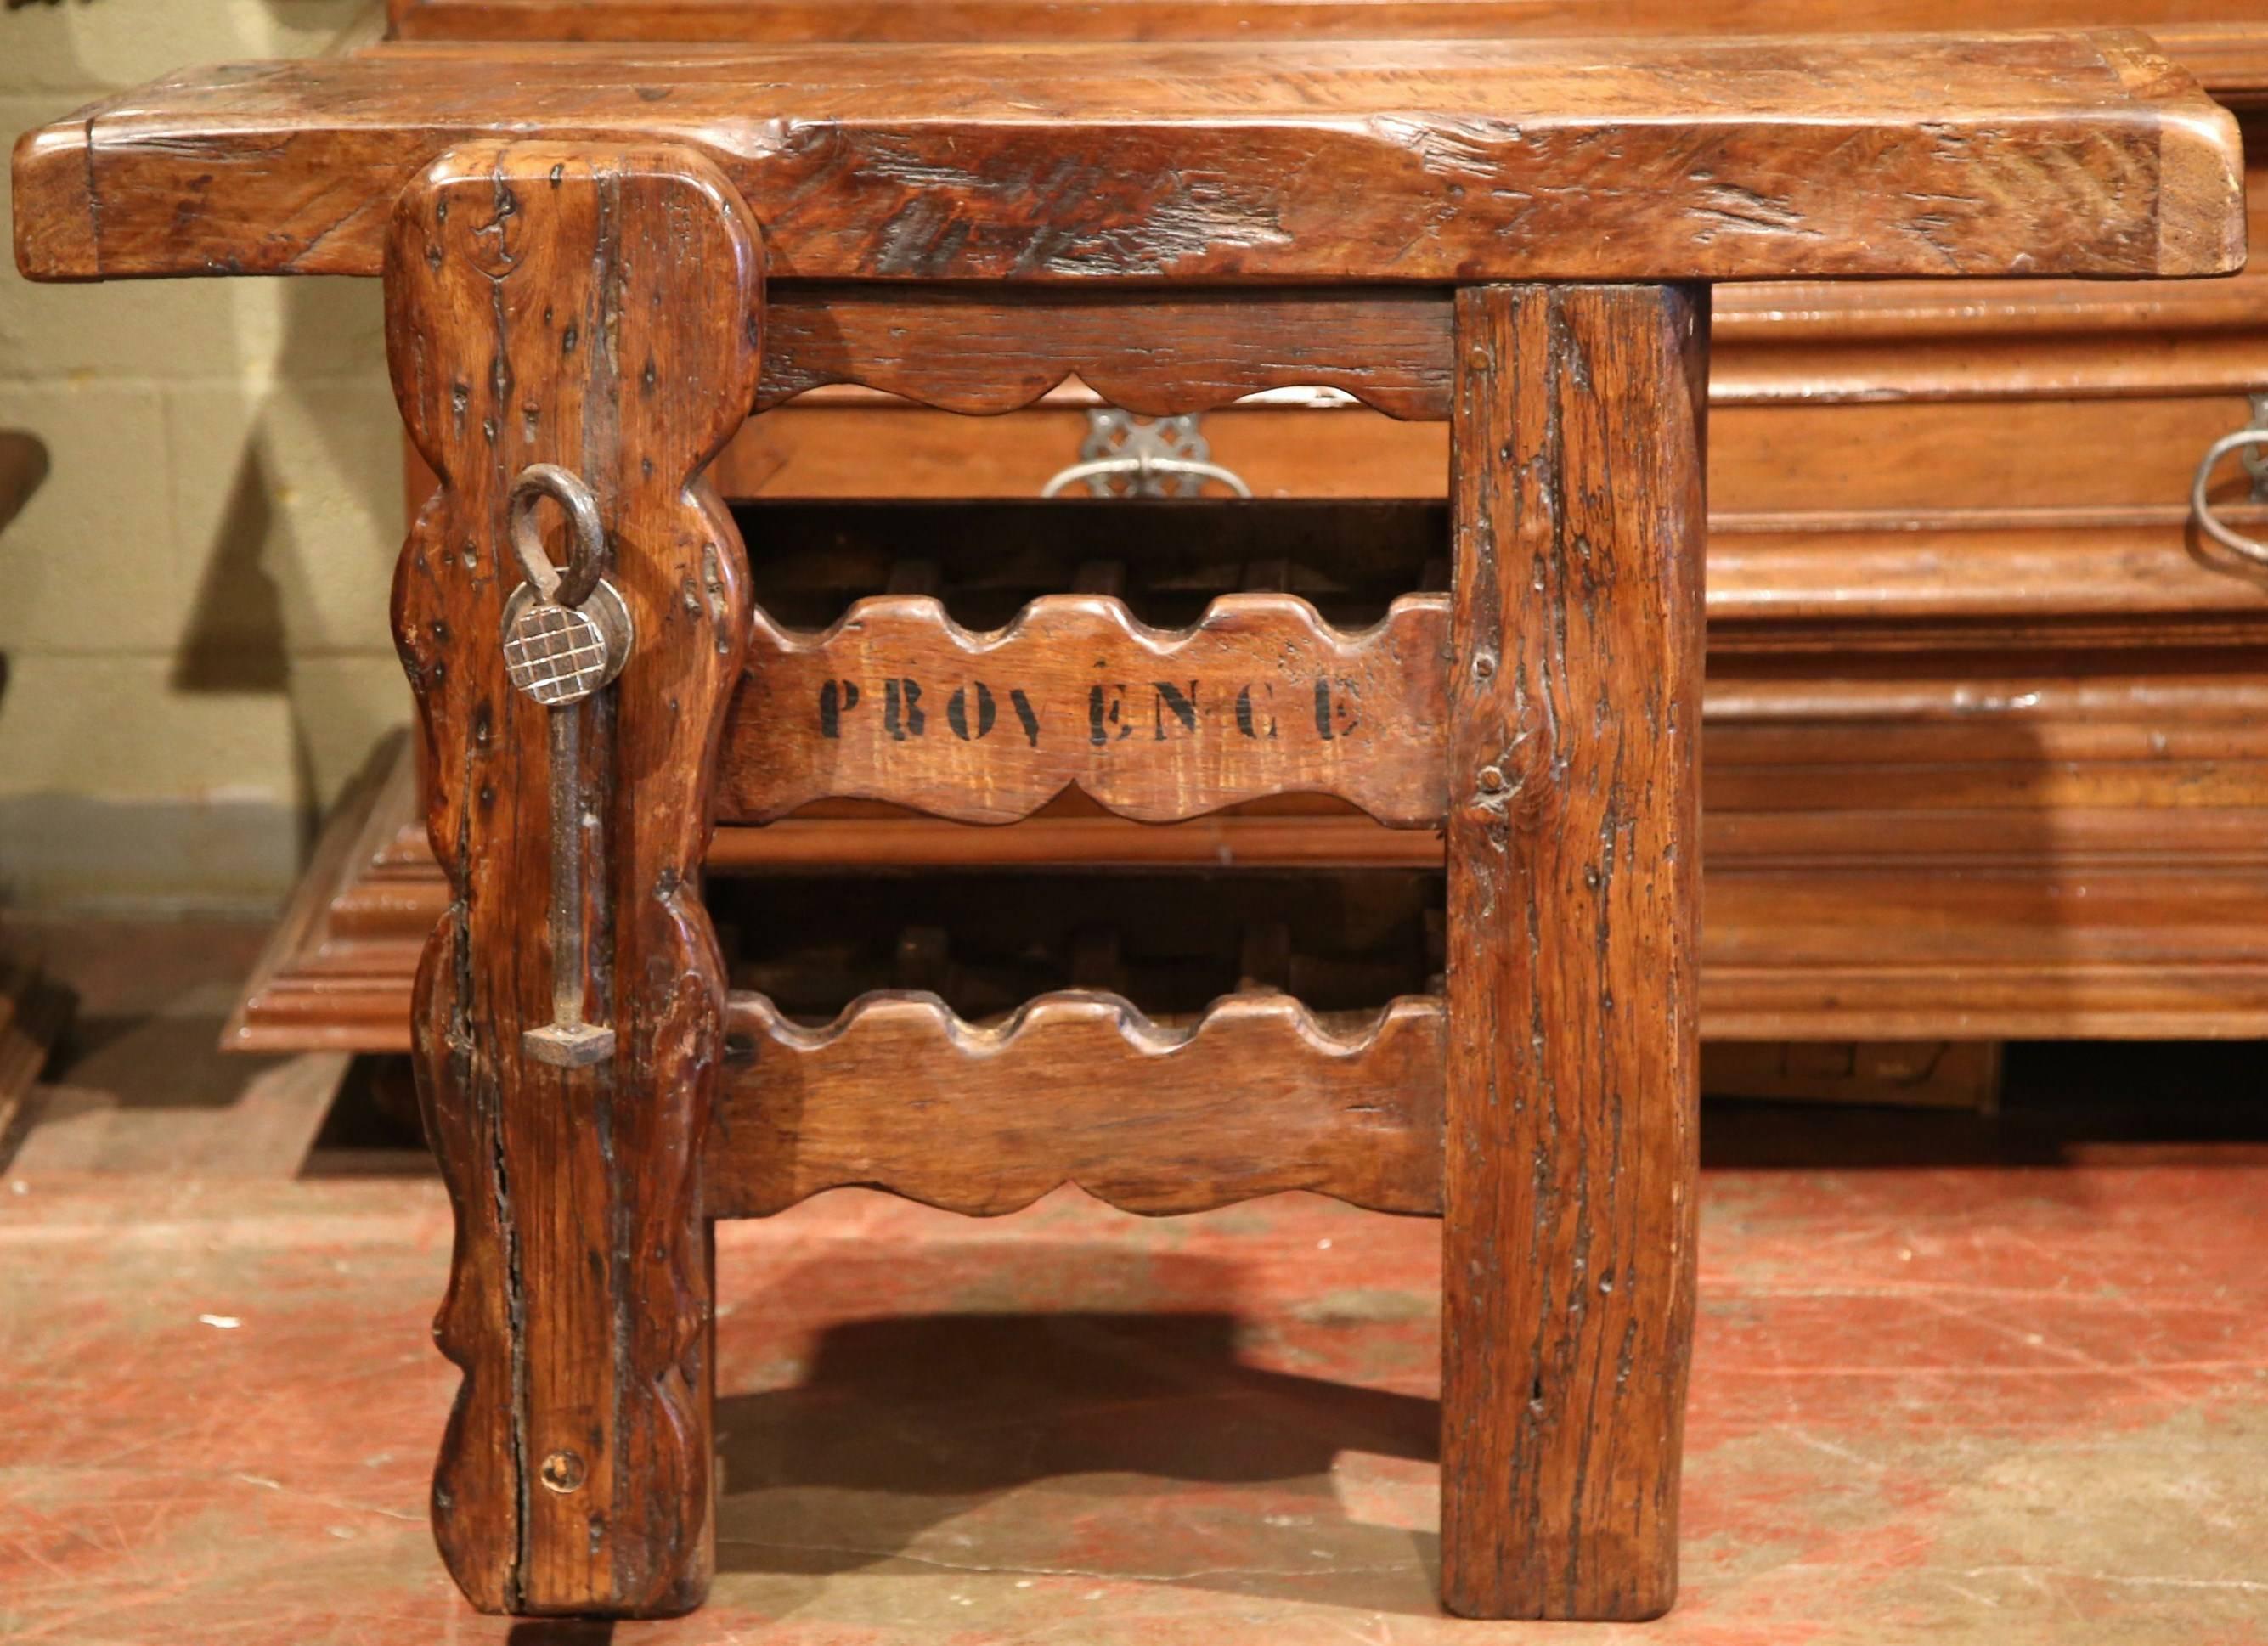 This antique table was crafted in the Poitou region of France, circa 1880. The country piece has a very thick top and features two rows underneath for the storage of wine bottles. The table also has 